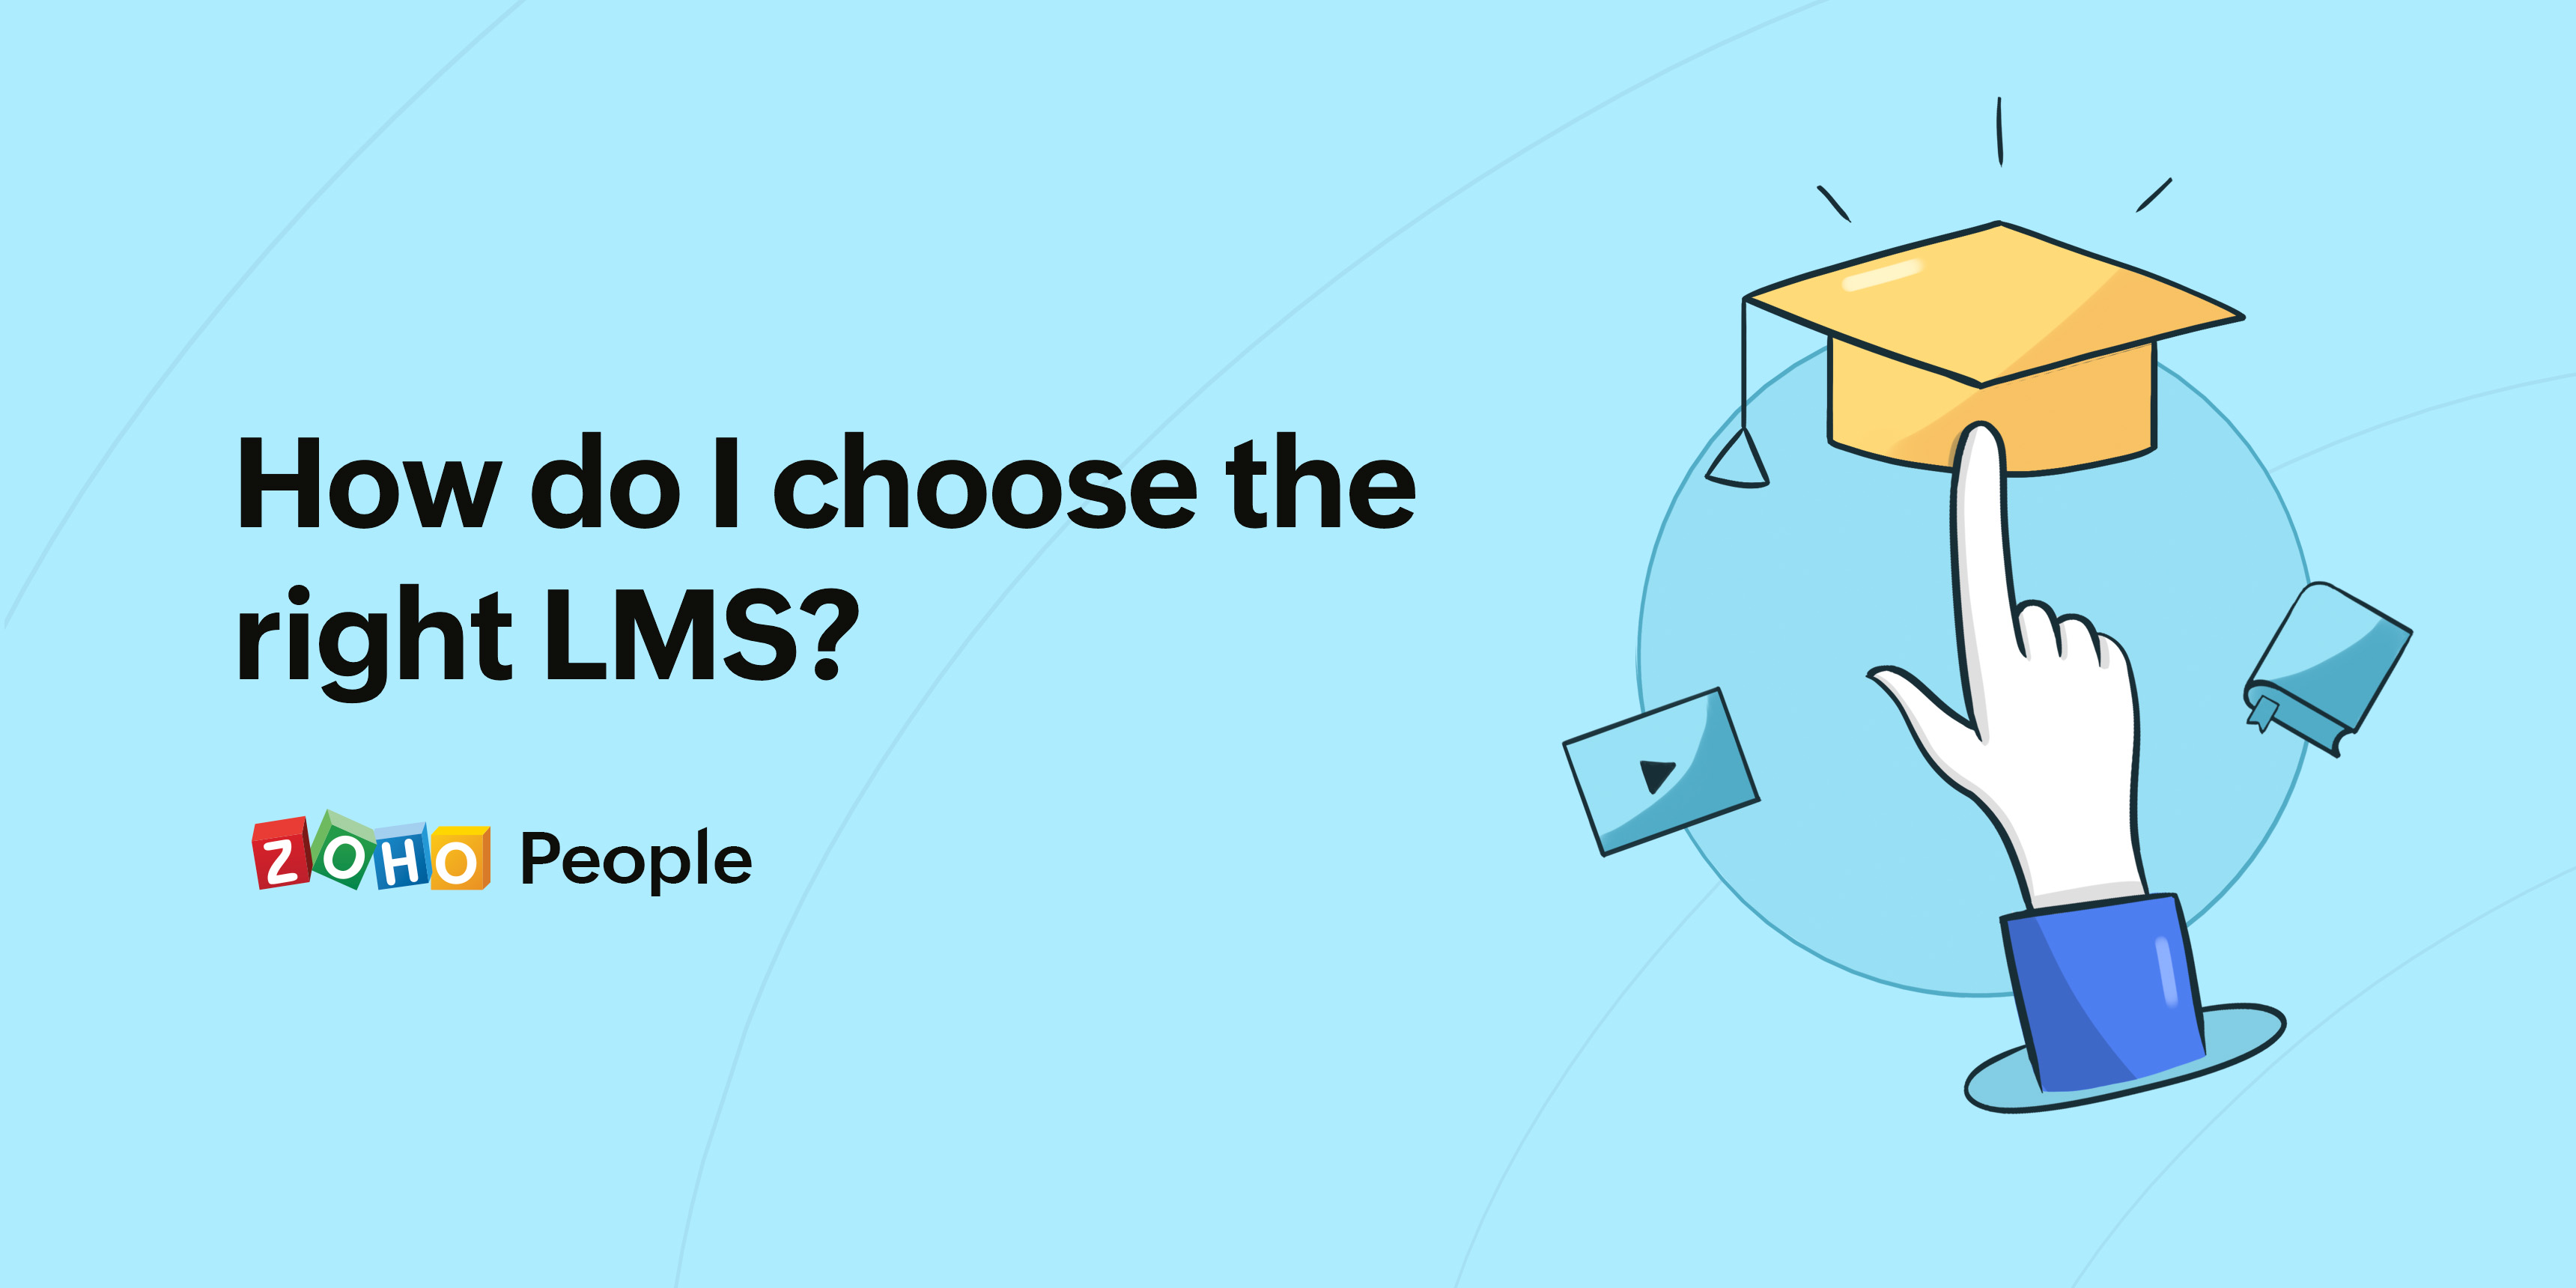 How do I choose the right LMS?